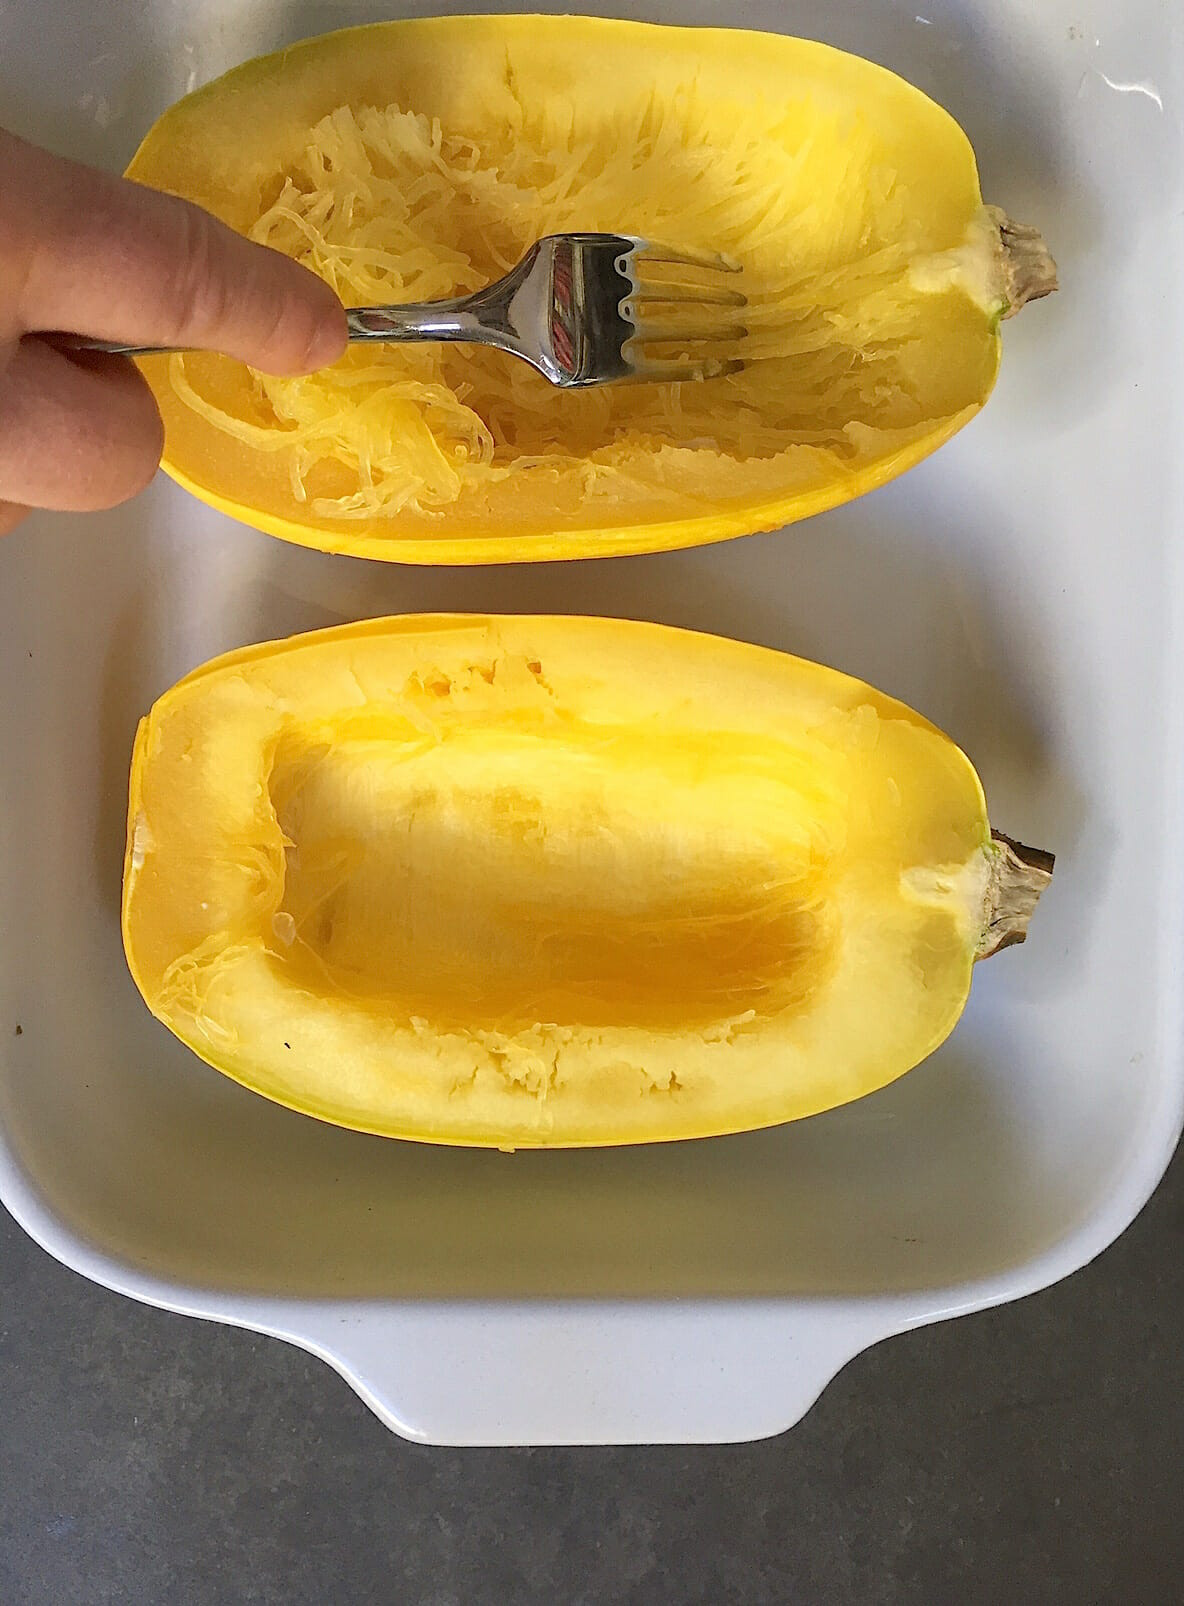 Cooking Spaghetti Squash In The Microwave
 How to Cook Spaghetti Squash in the Microwave in just a